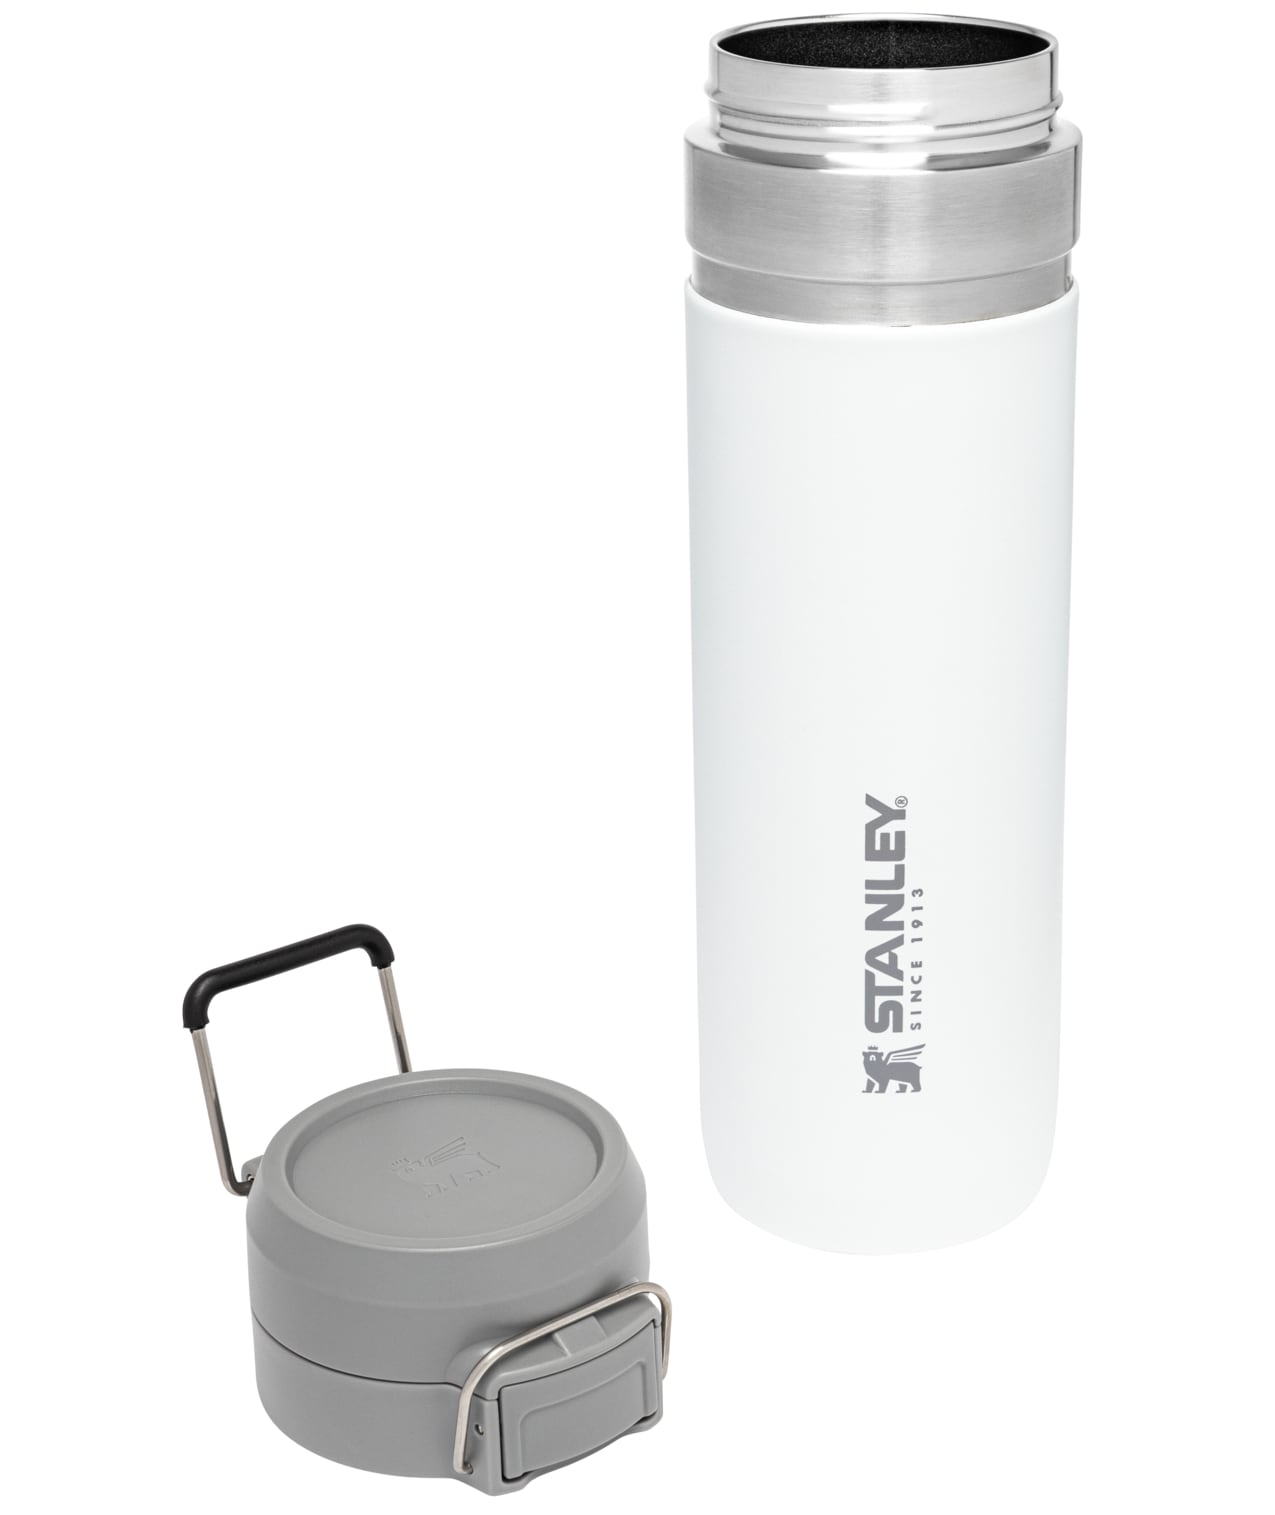 Stanley QF BOTTLE 24-OZ ROSE QUARTZ Insulated Stainless Steel